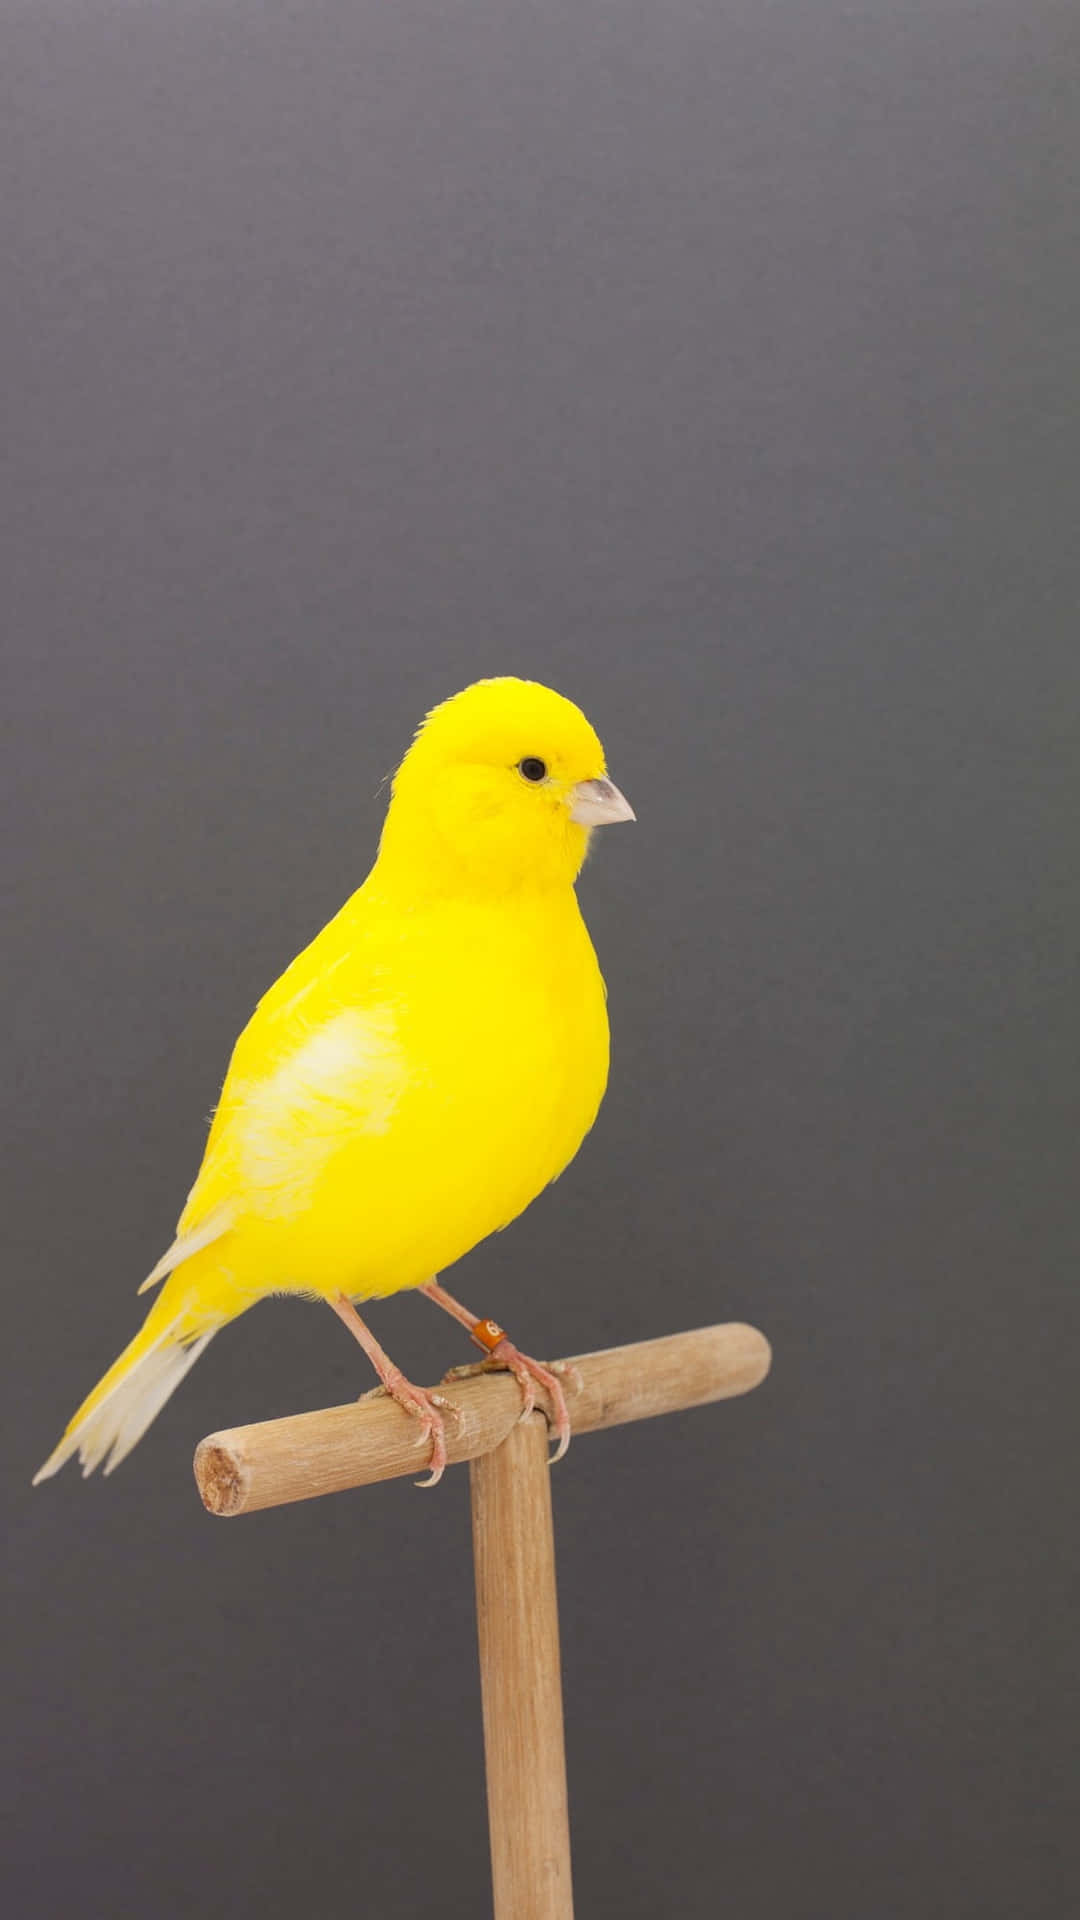 Caption: Vibrant Yellow Canary Perched on a Branch Wallpaper